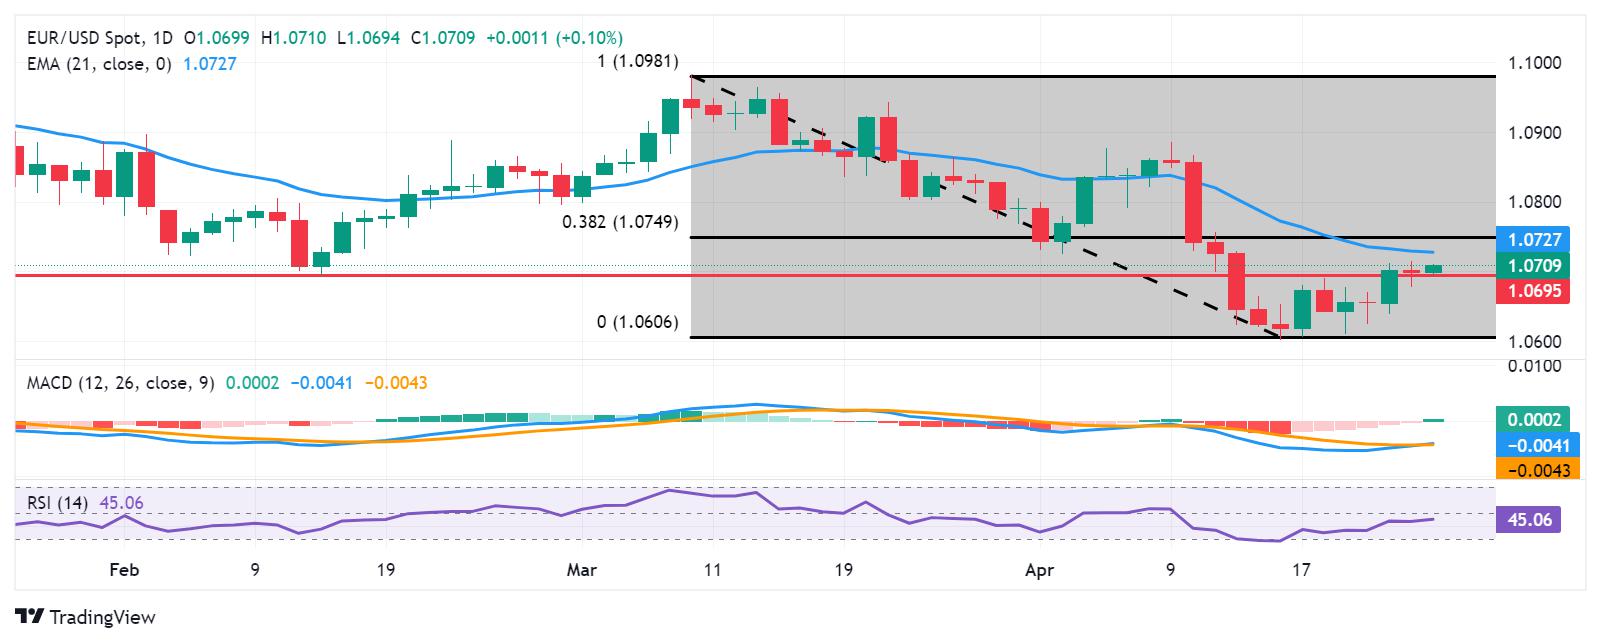 EUR/USD Price Analysis: Moves above 1.0700, next barrier at 21-day EMA